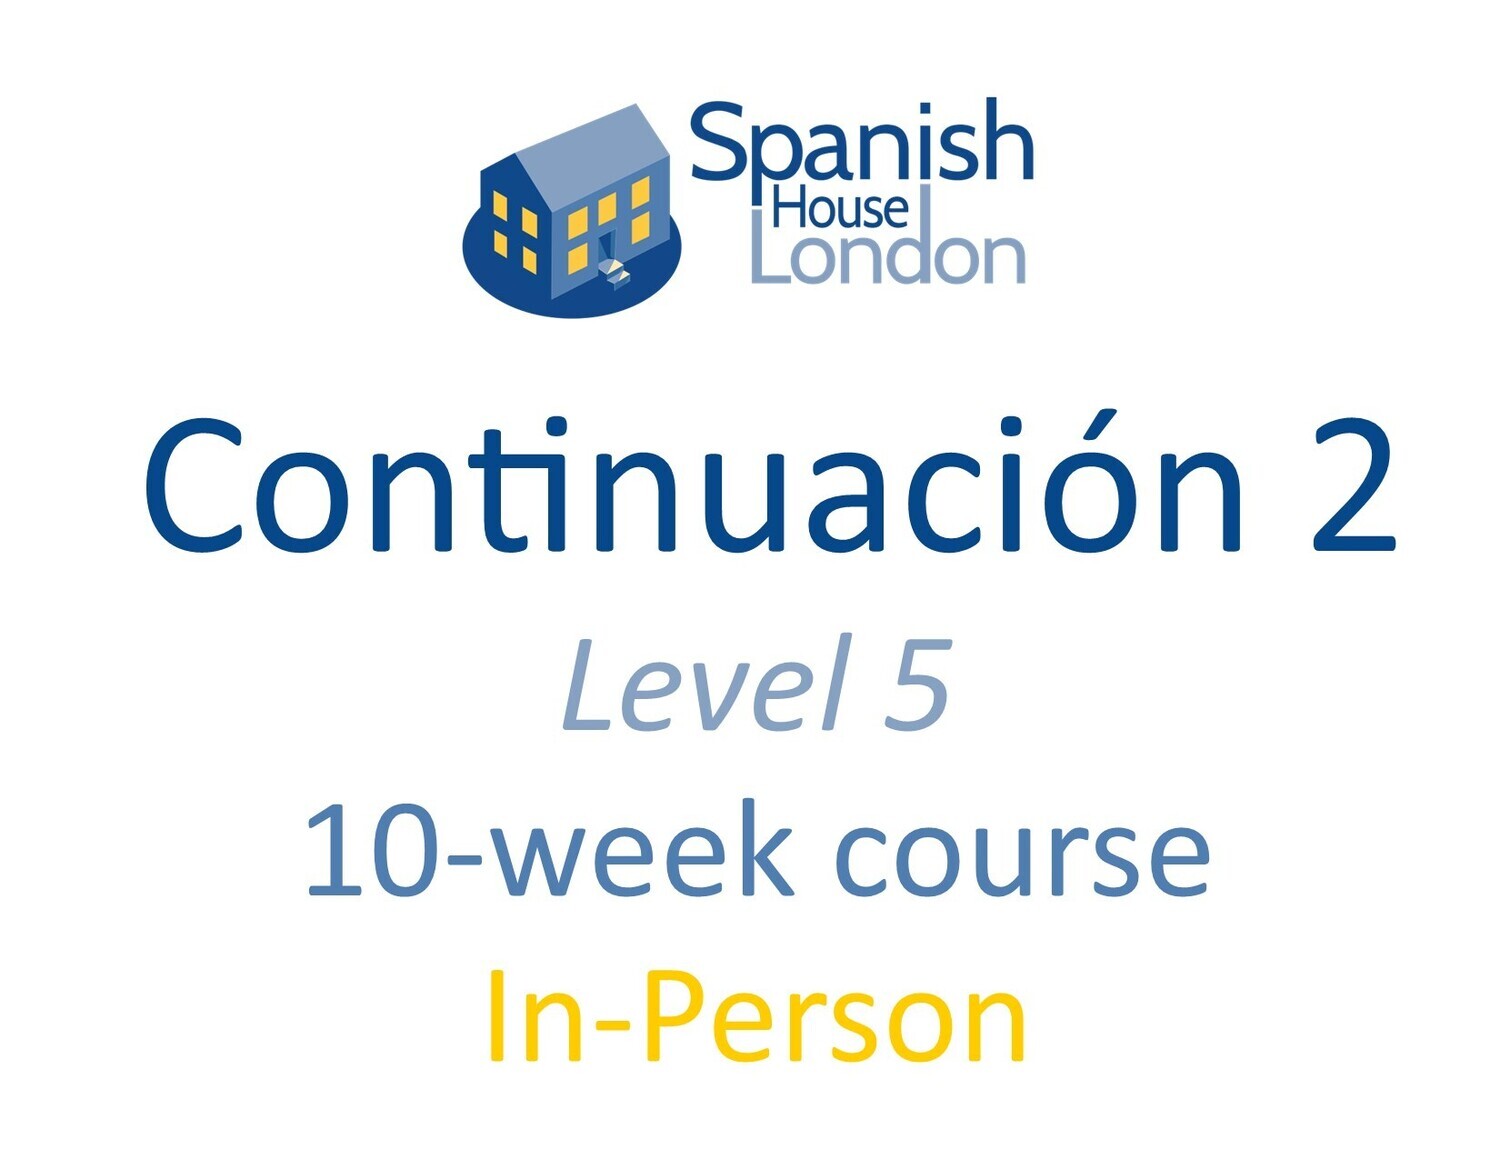 Continuacion 2 Course starting on 1st September at 6pm in Euston / King's Cross